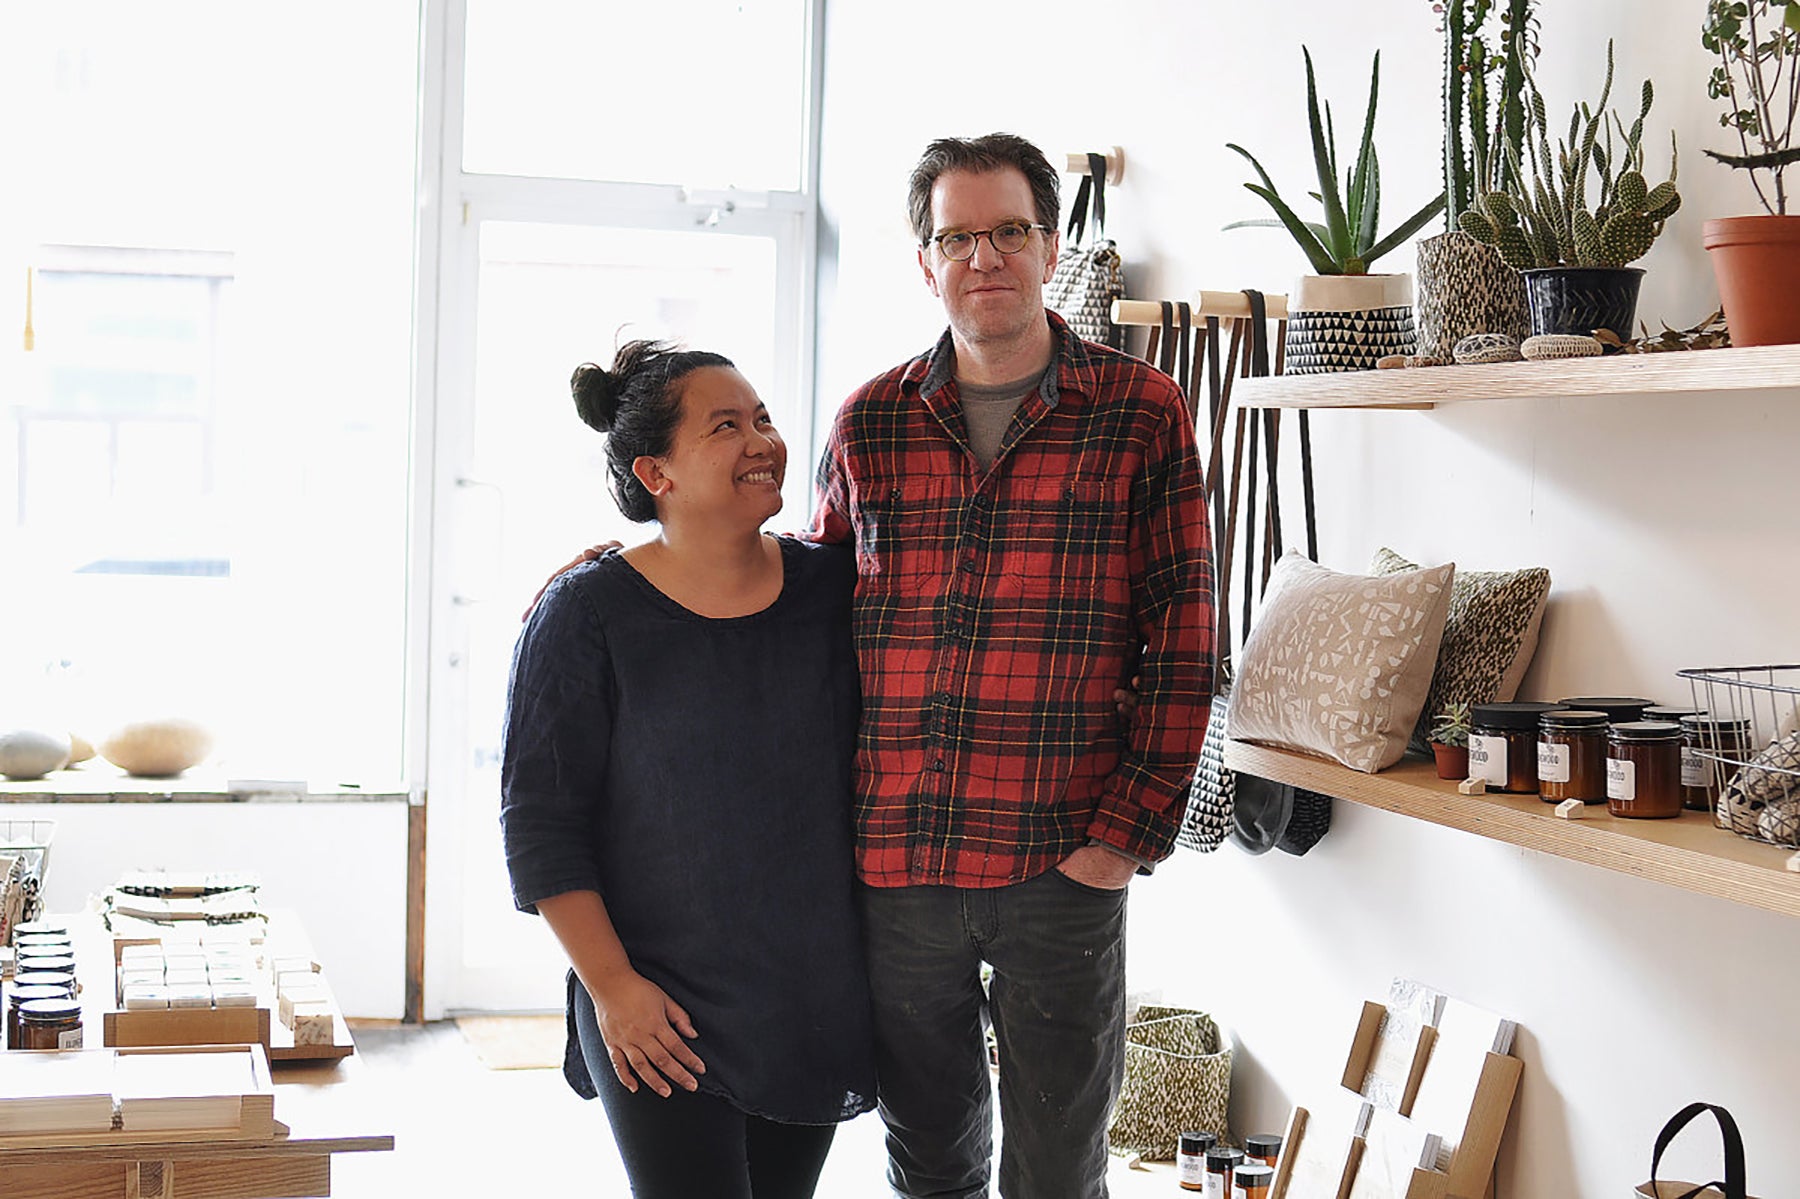 Portrait of Arounna and John, founders of Bookhou, standing in their retail store. There are handmade goods on the shelves to the right of them and Arounna is looking up a John while he looks directly to camera. Arounna is wearing a loose navy long sleeve top and John is wearing a red checkered lumber shirt. 